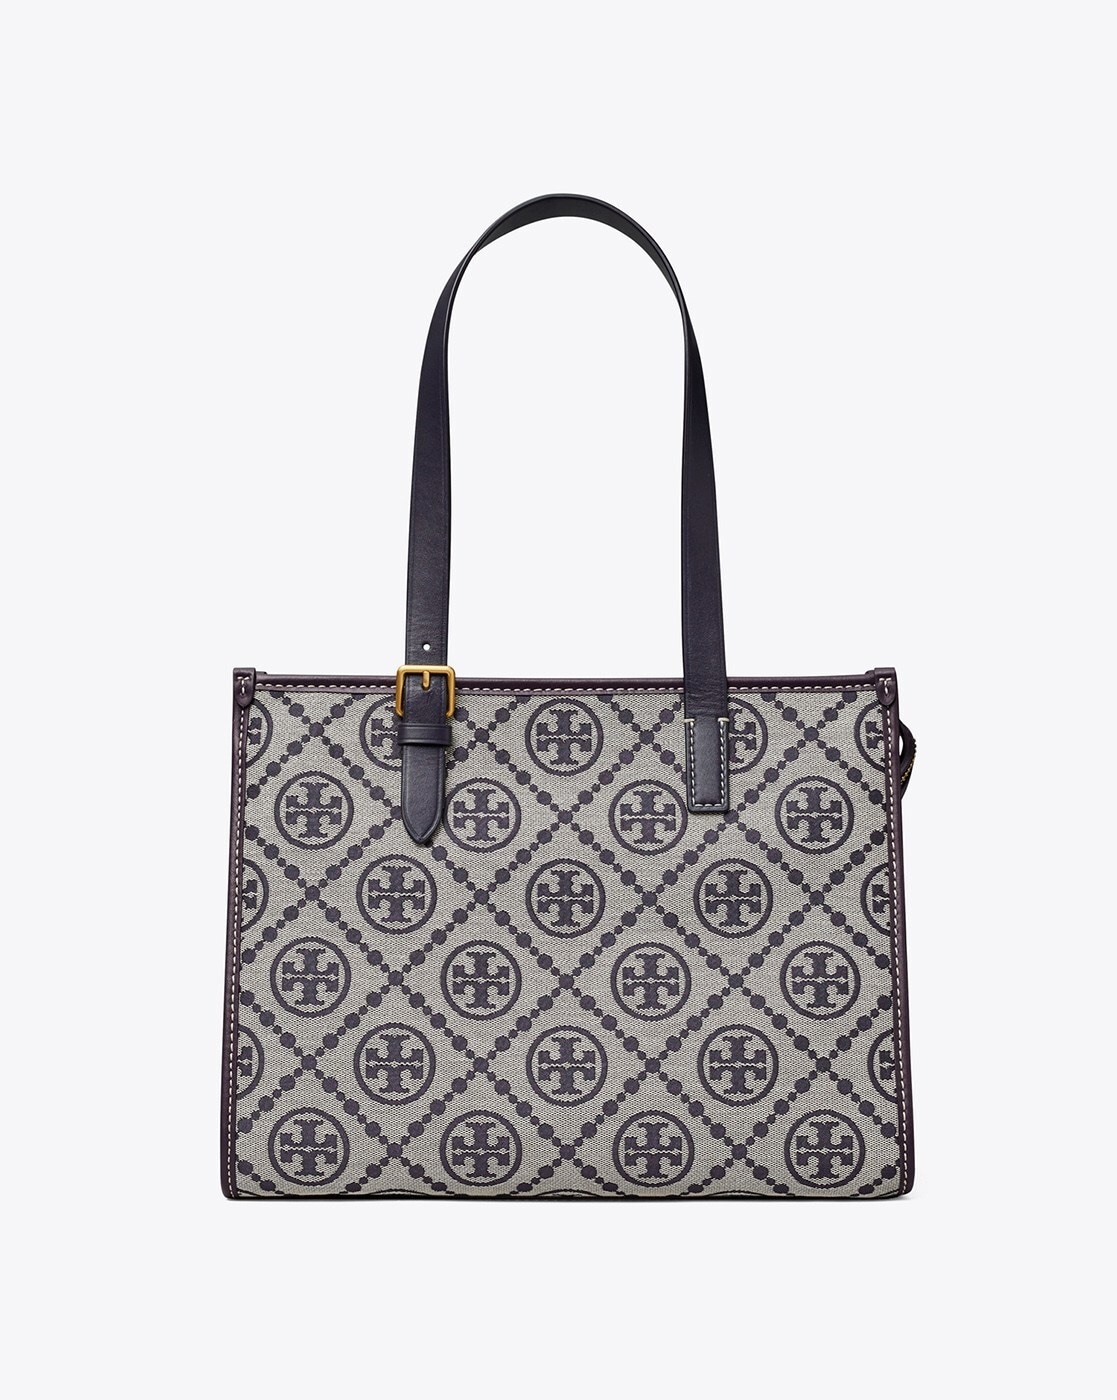 Tory Burch T Monogram Coated Canvas Tote Bag 💰Small- RM600 Large